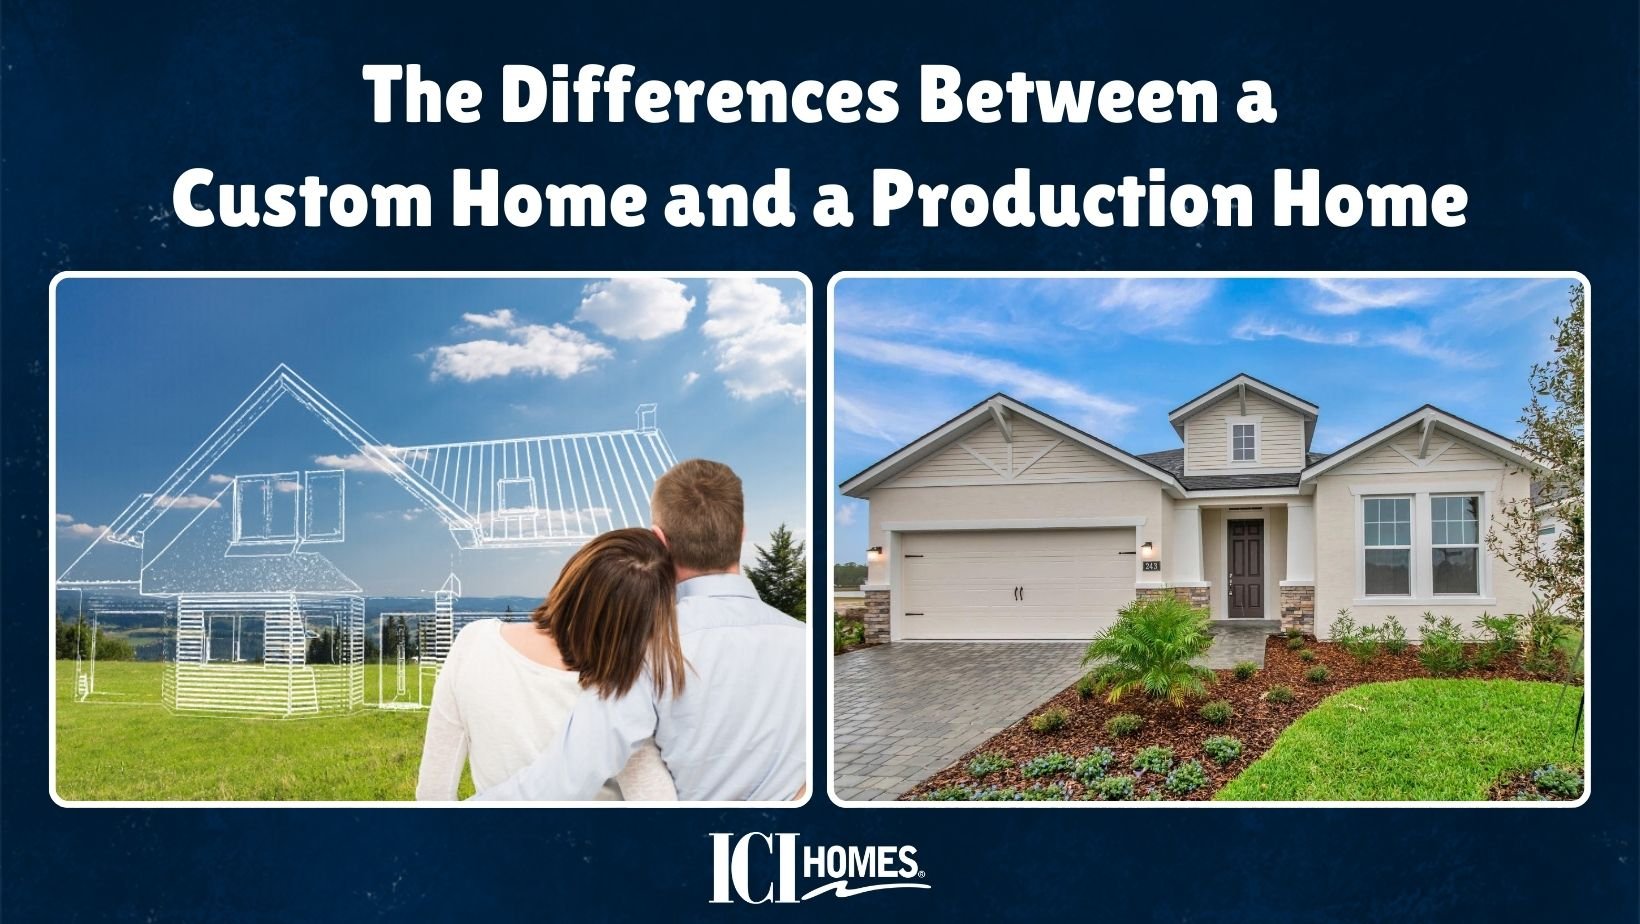 What is the Difference Between a Custom Home vs Production Home? - Custom Home vs Production home